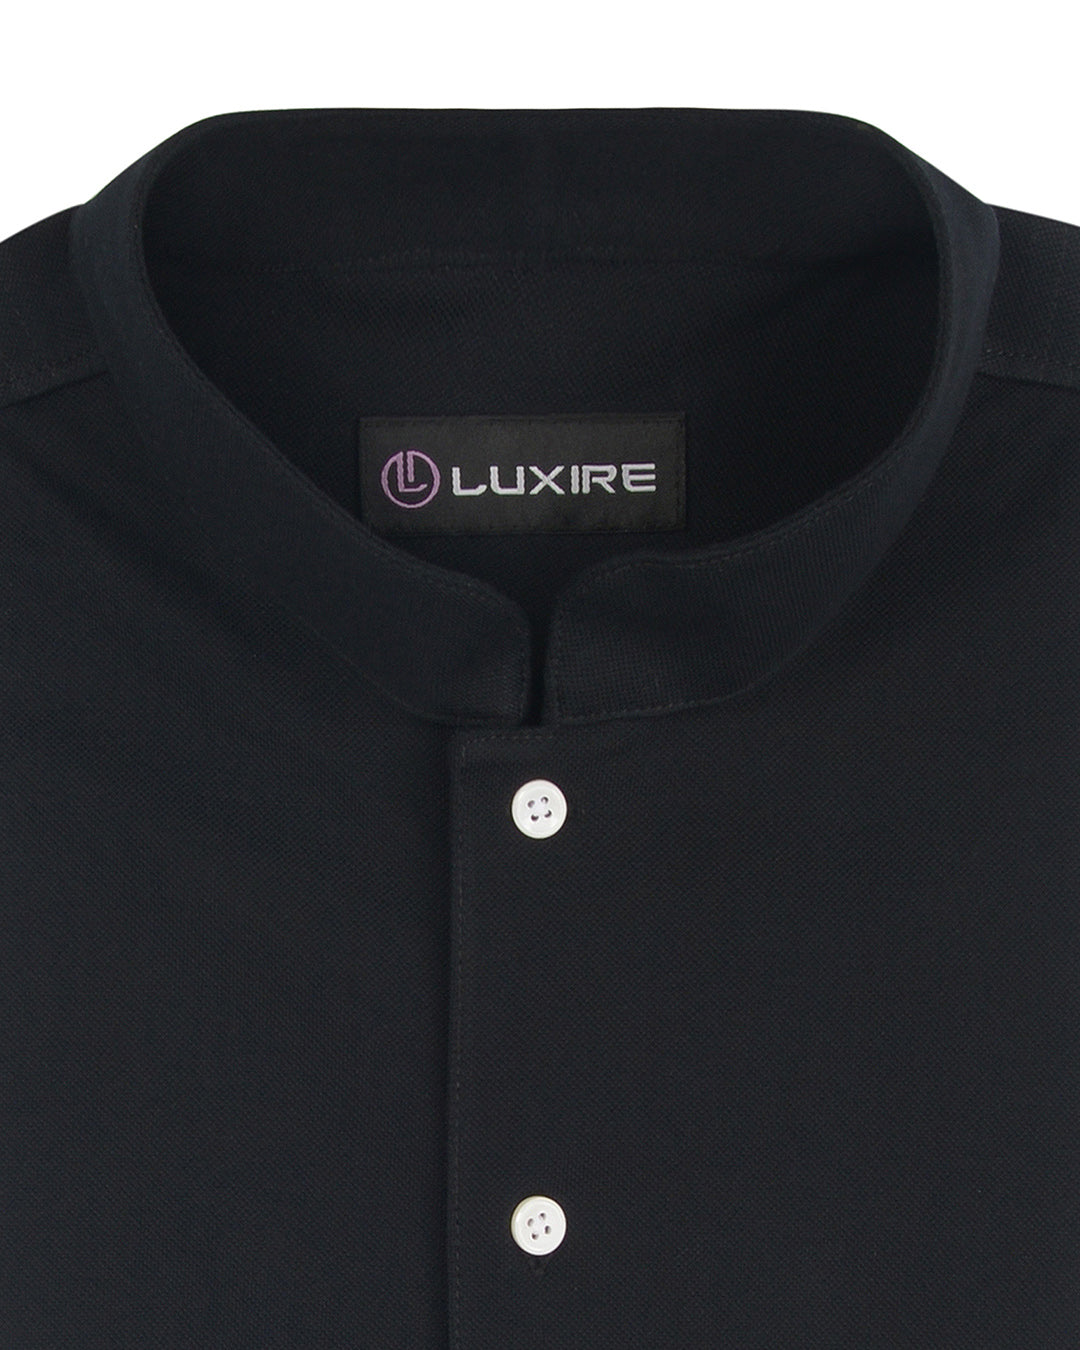 Collar of the custom oxford polo shirt for men by Luxire in metal black